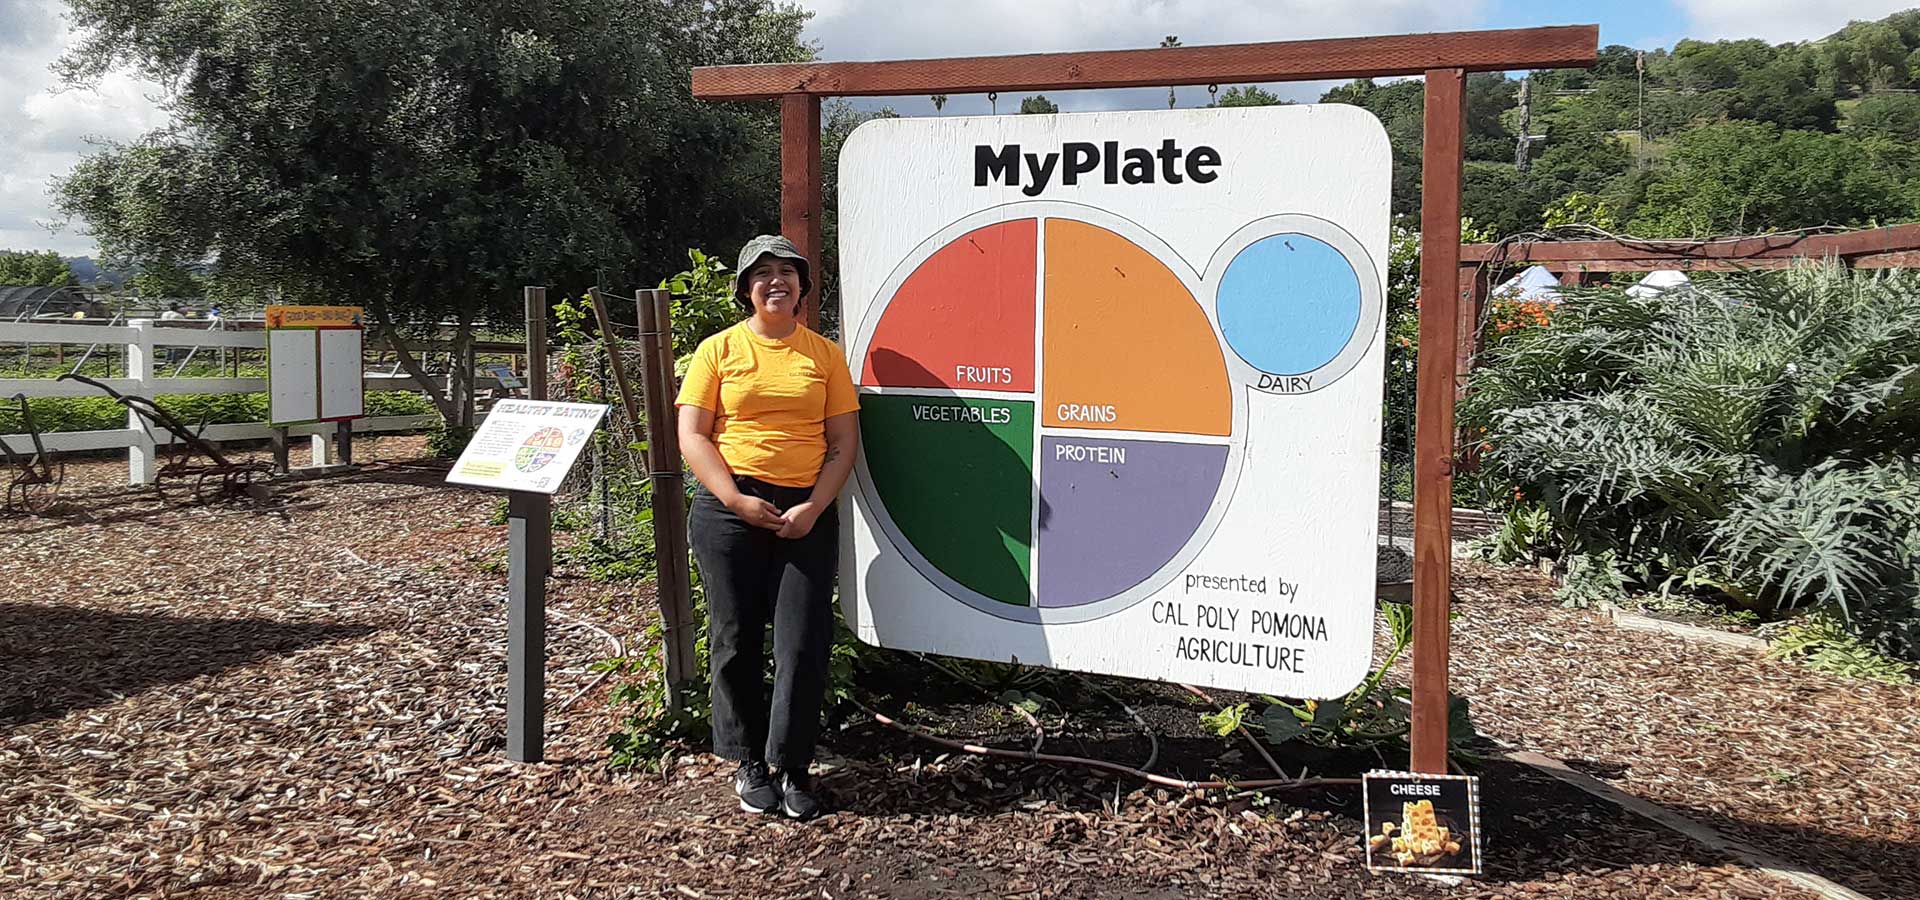 A female student stands in front of a MyPlate display in the Children's Garden at AGRIscapes